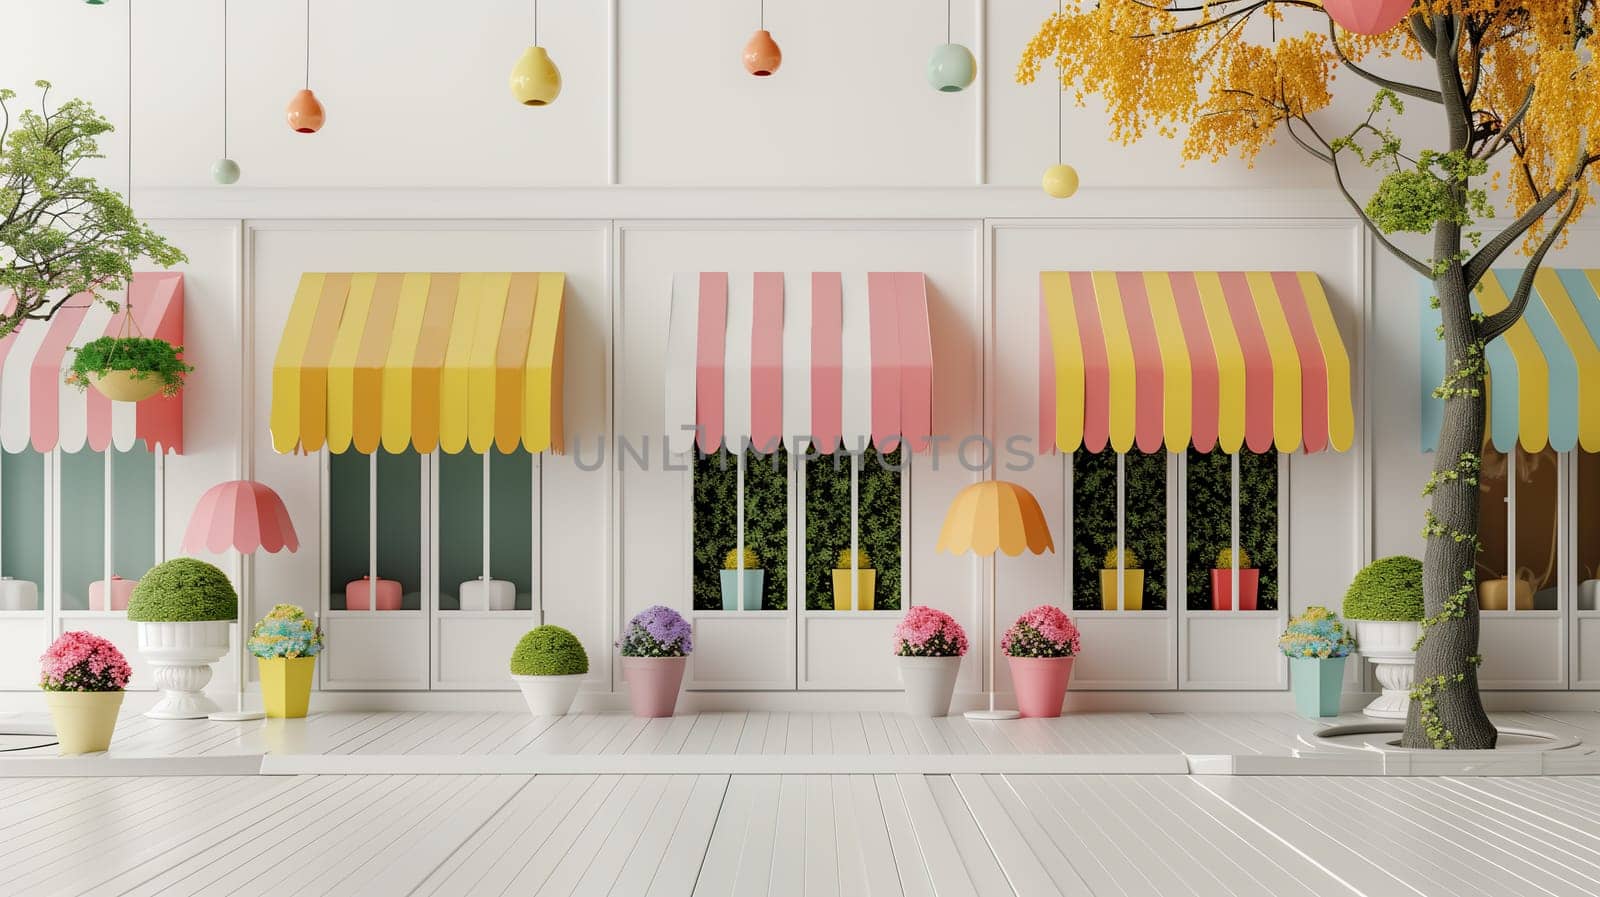 Various Colored Awnings in a Room by TRMK